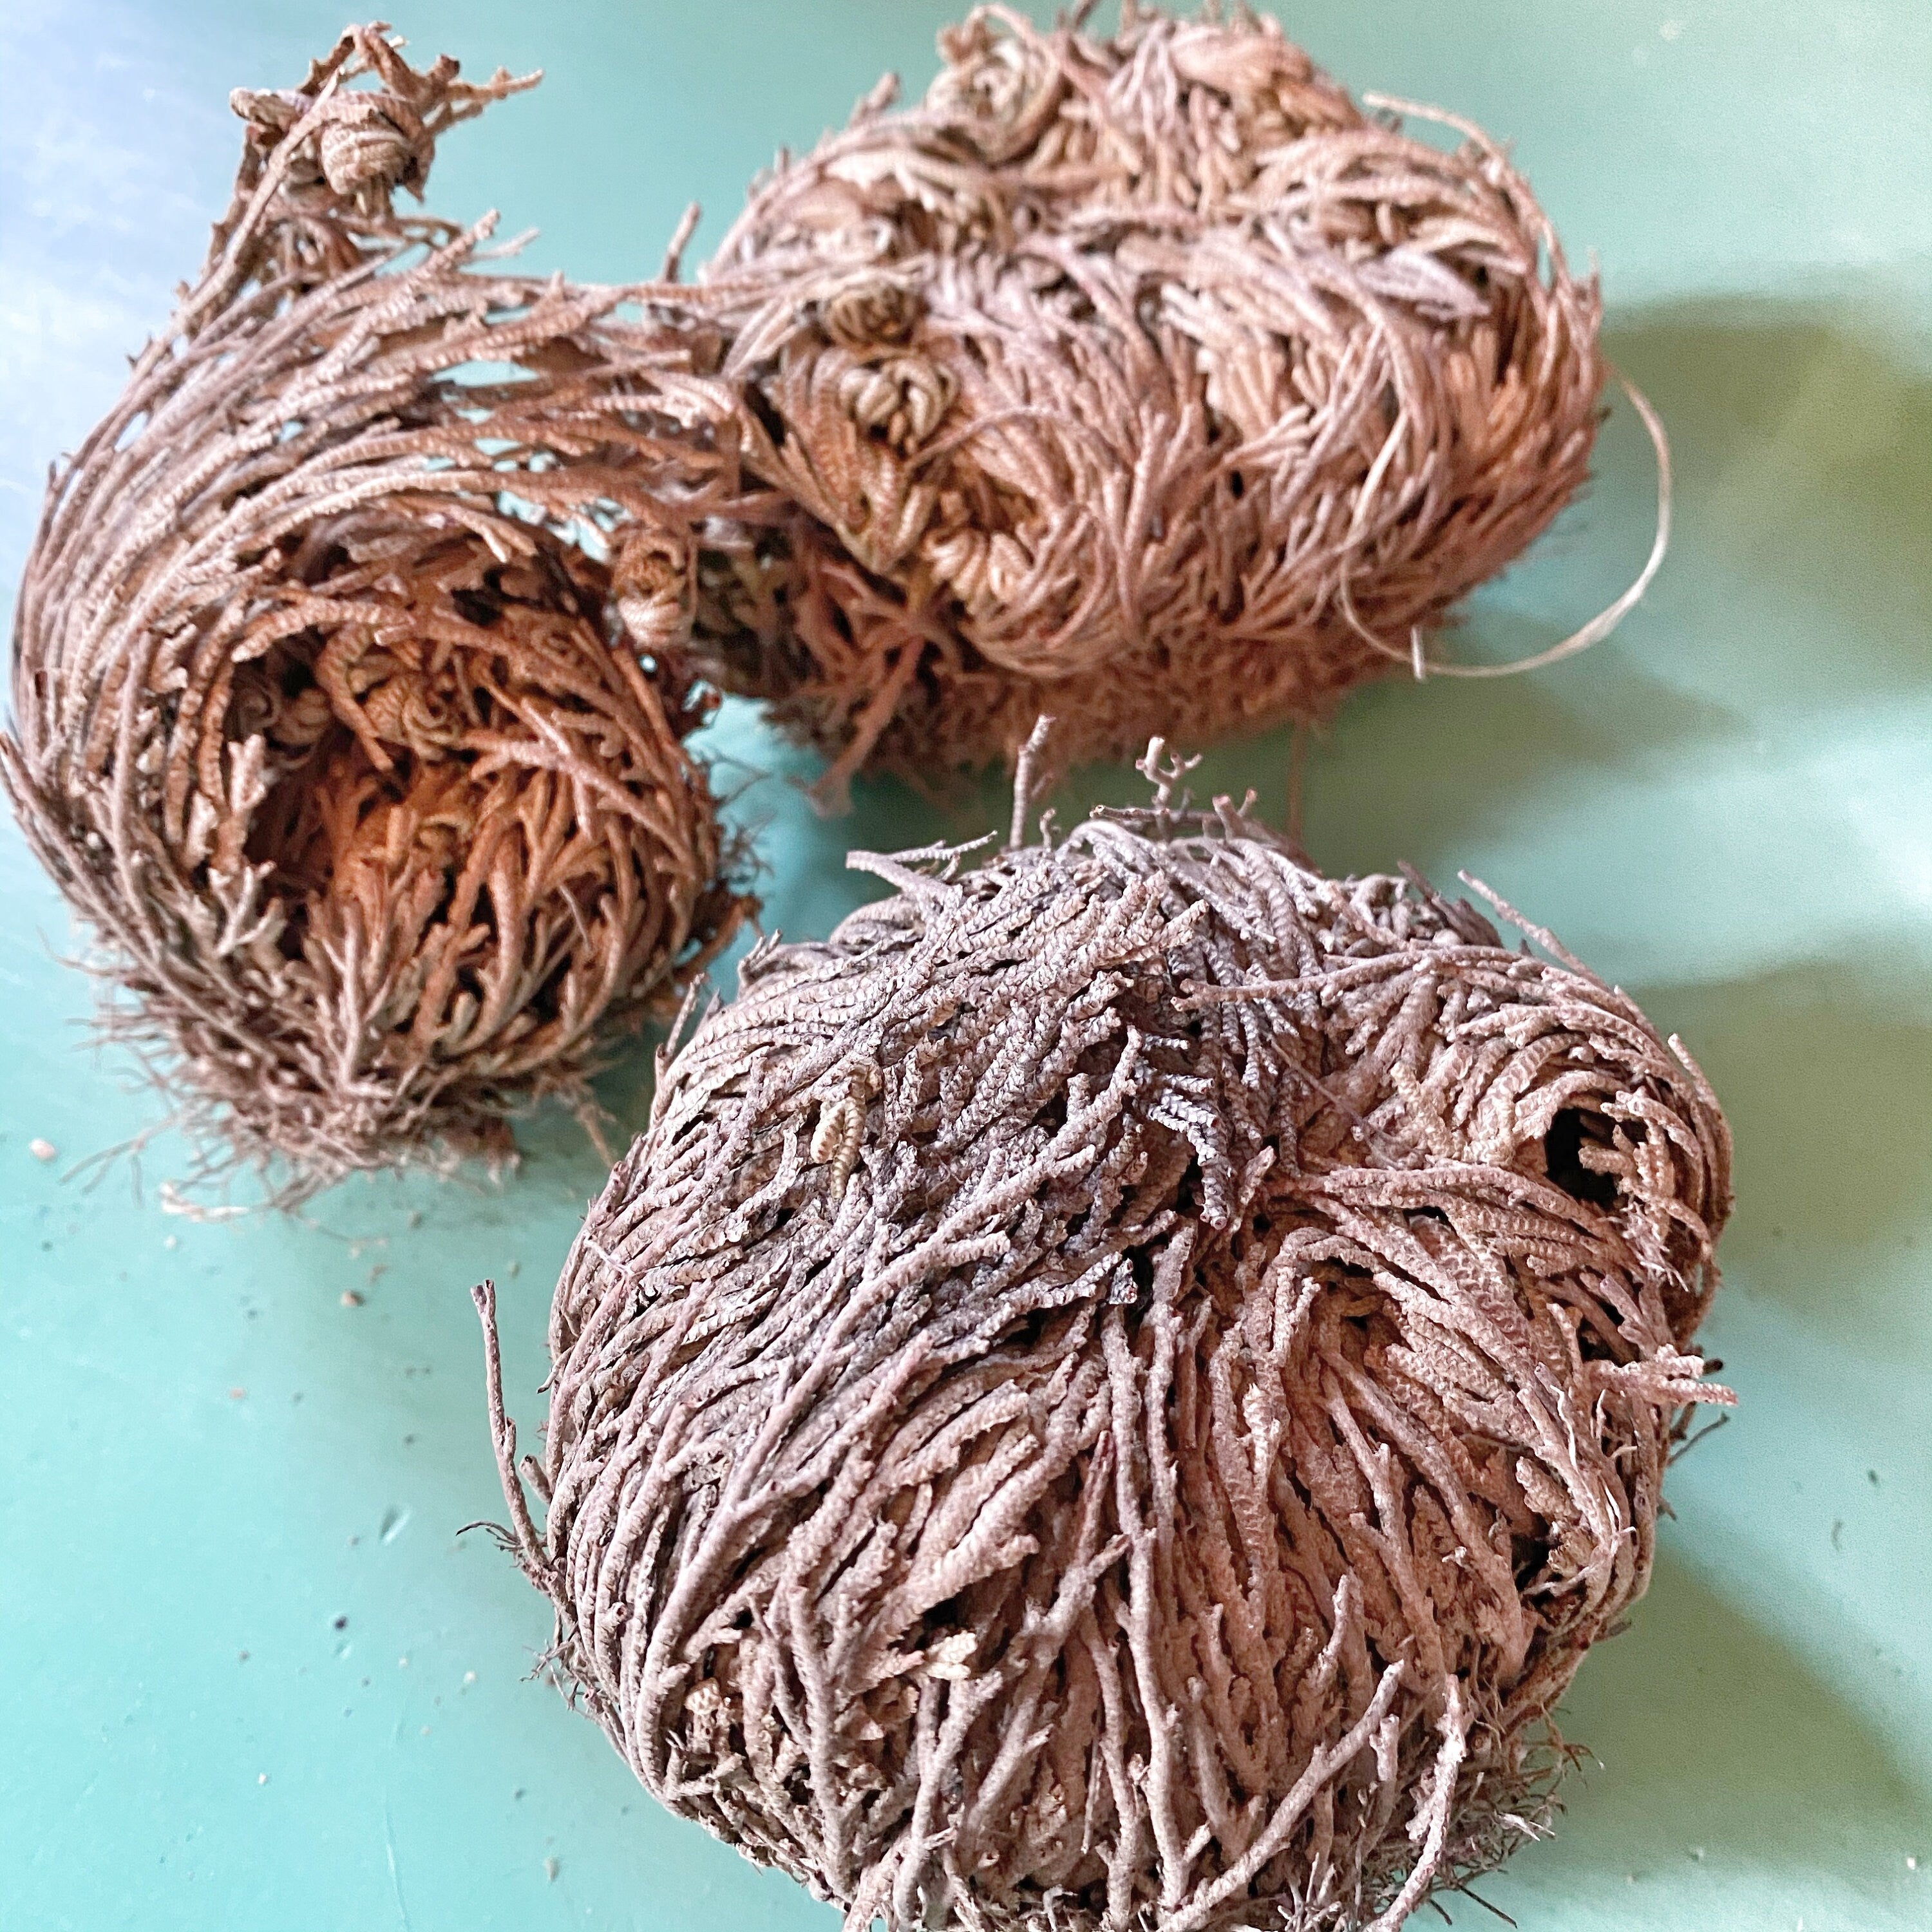 Three Rose of Jericho plants rest on a teal surface, their intricate, tangled root systems curled inward in a natural, spherical shape, characteristic of these desert plants known for their remarkable drought survival strategy.